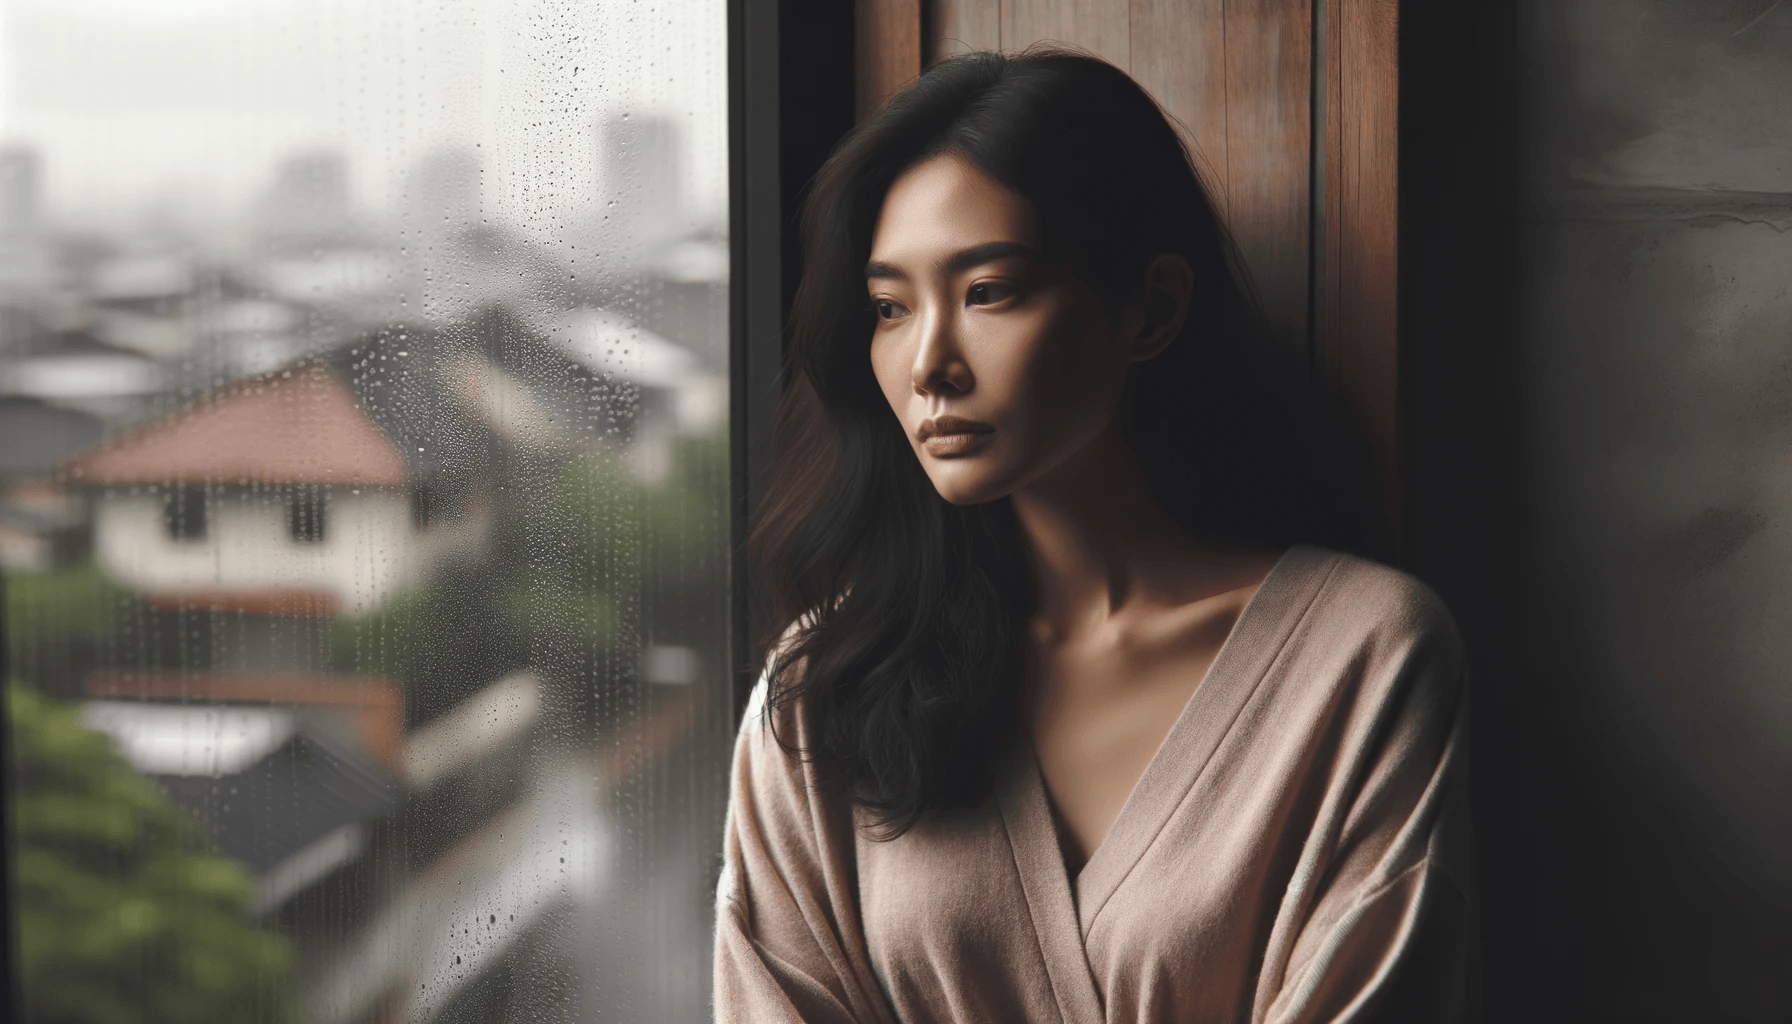 a woman of Asian descent standing by a window gazing outside with a melancholic expression. Raindrops on the window pane further emphasize t